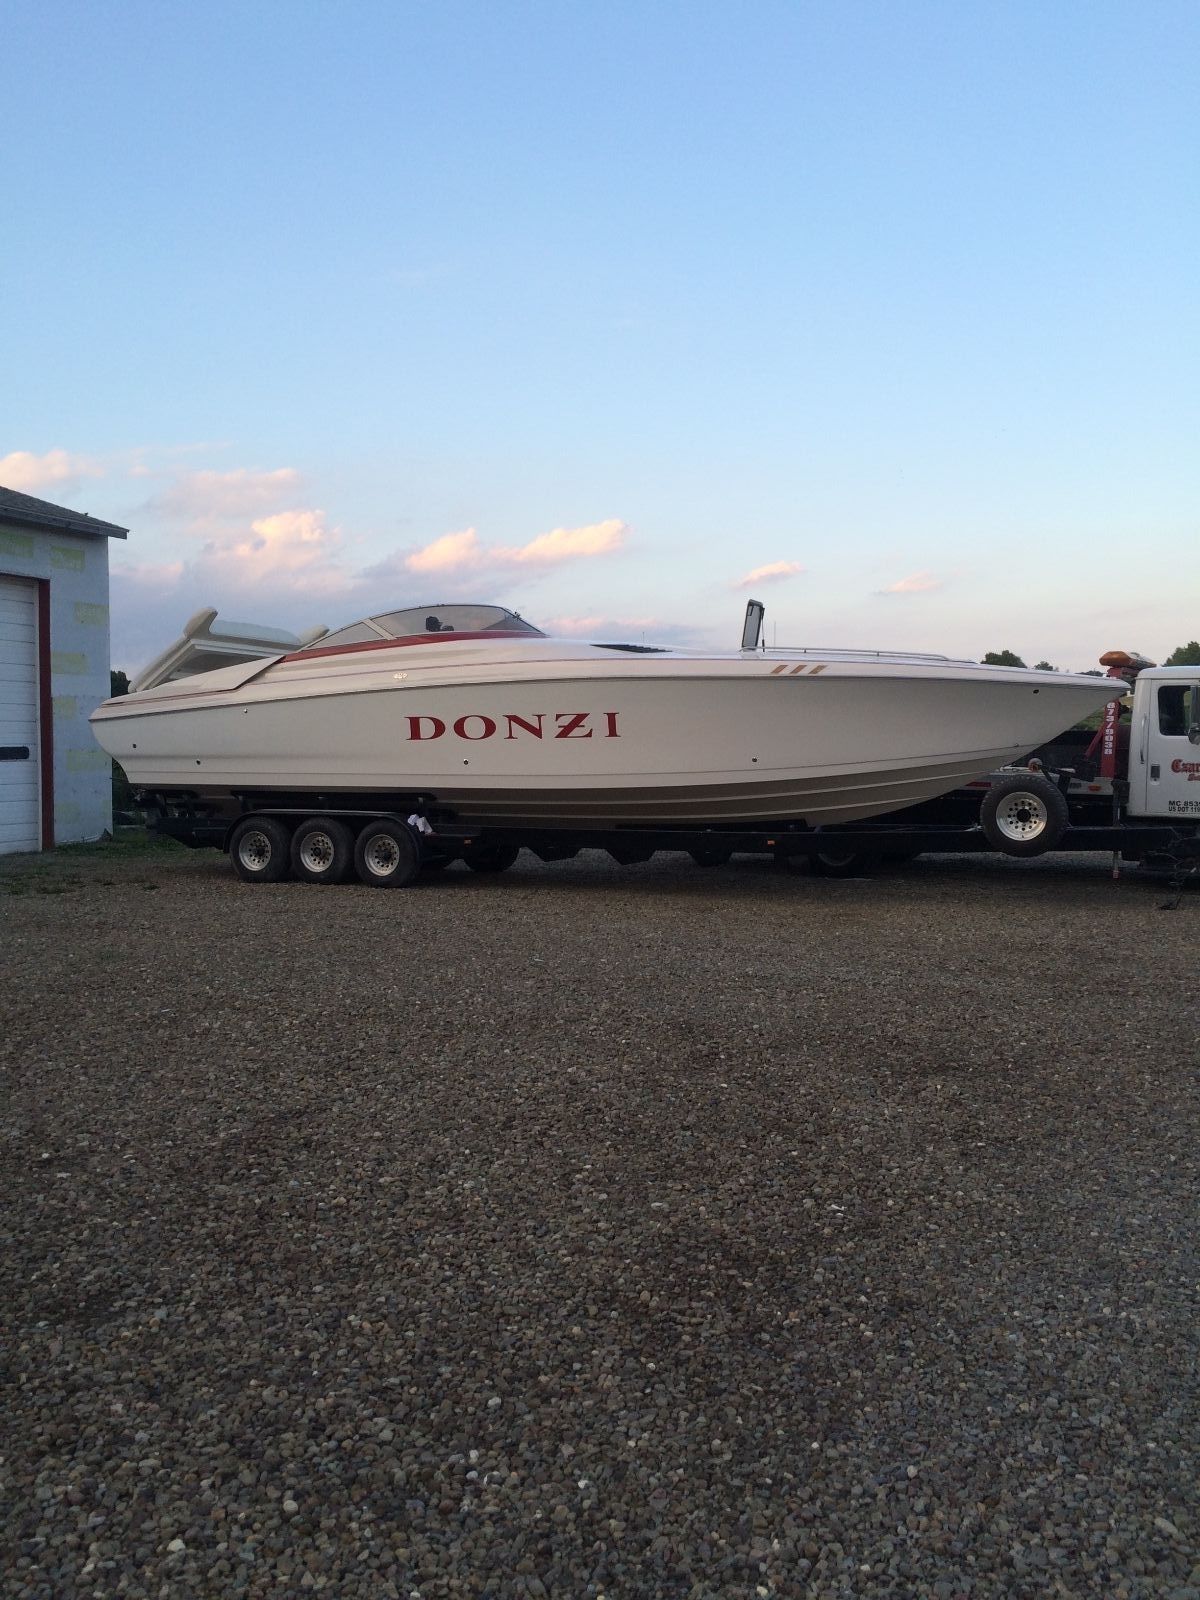 Donzi 38 ZX 1996 for sale for $32,000.